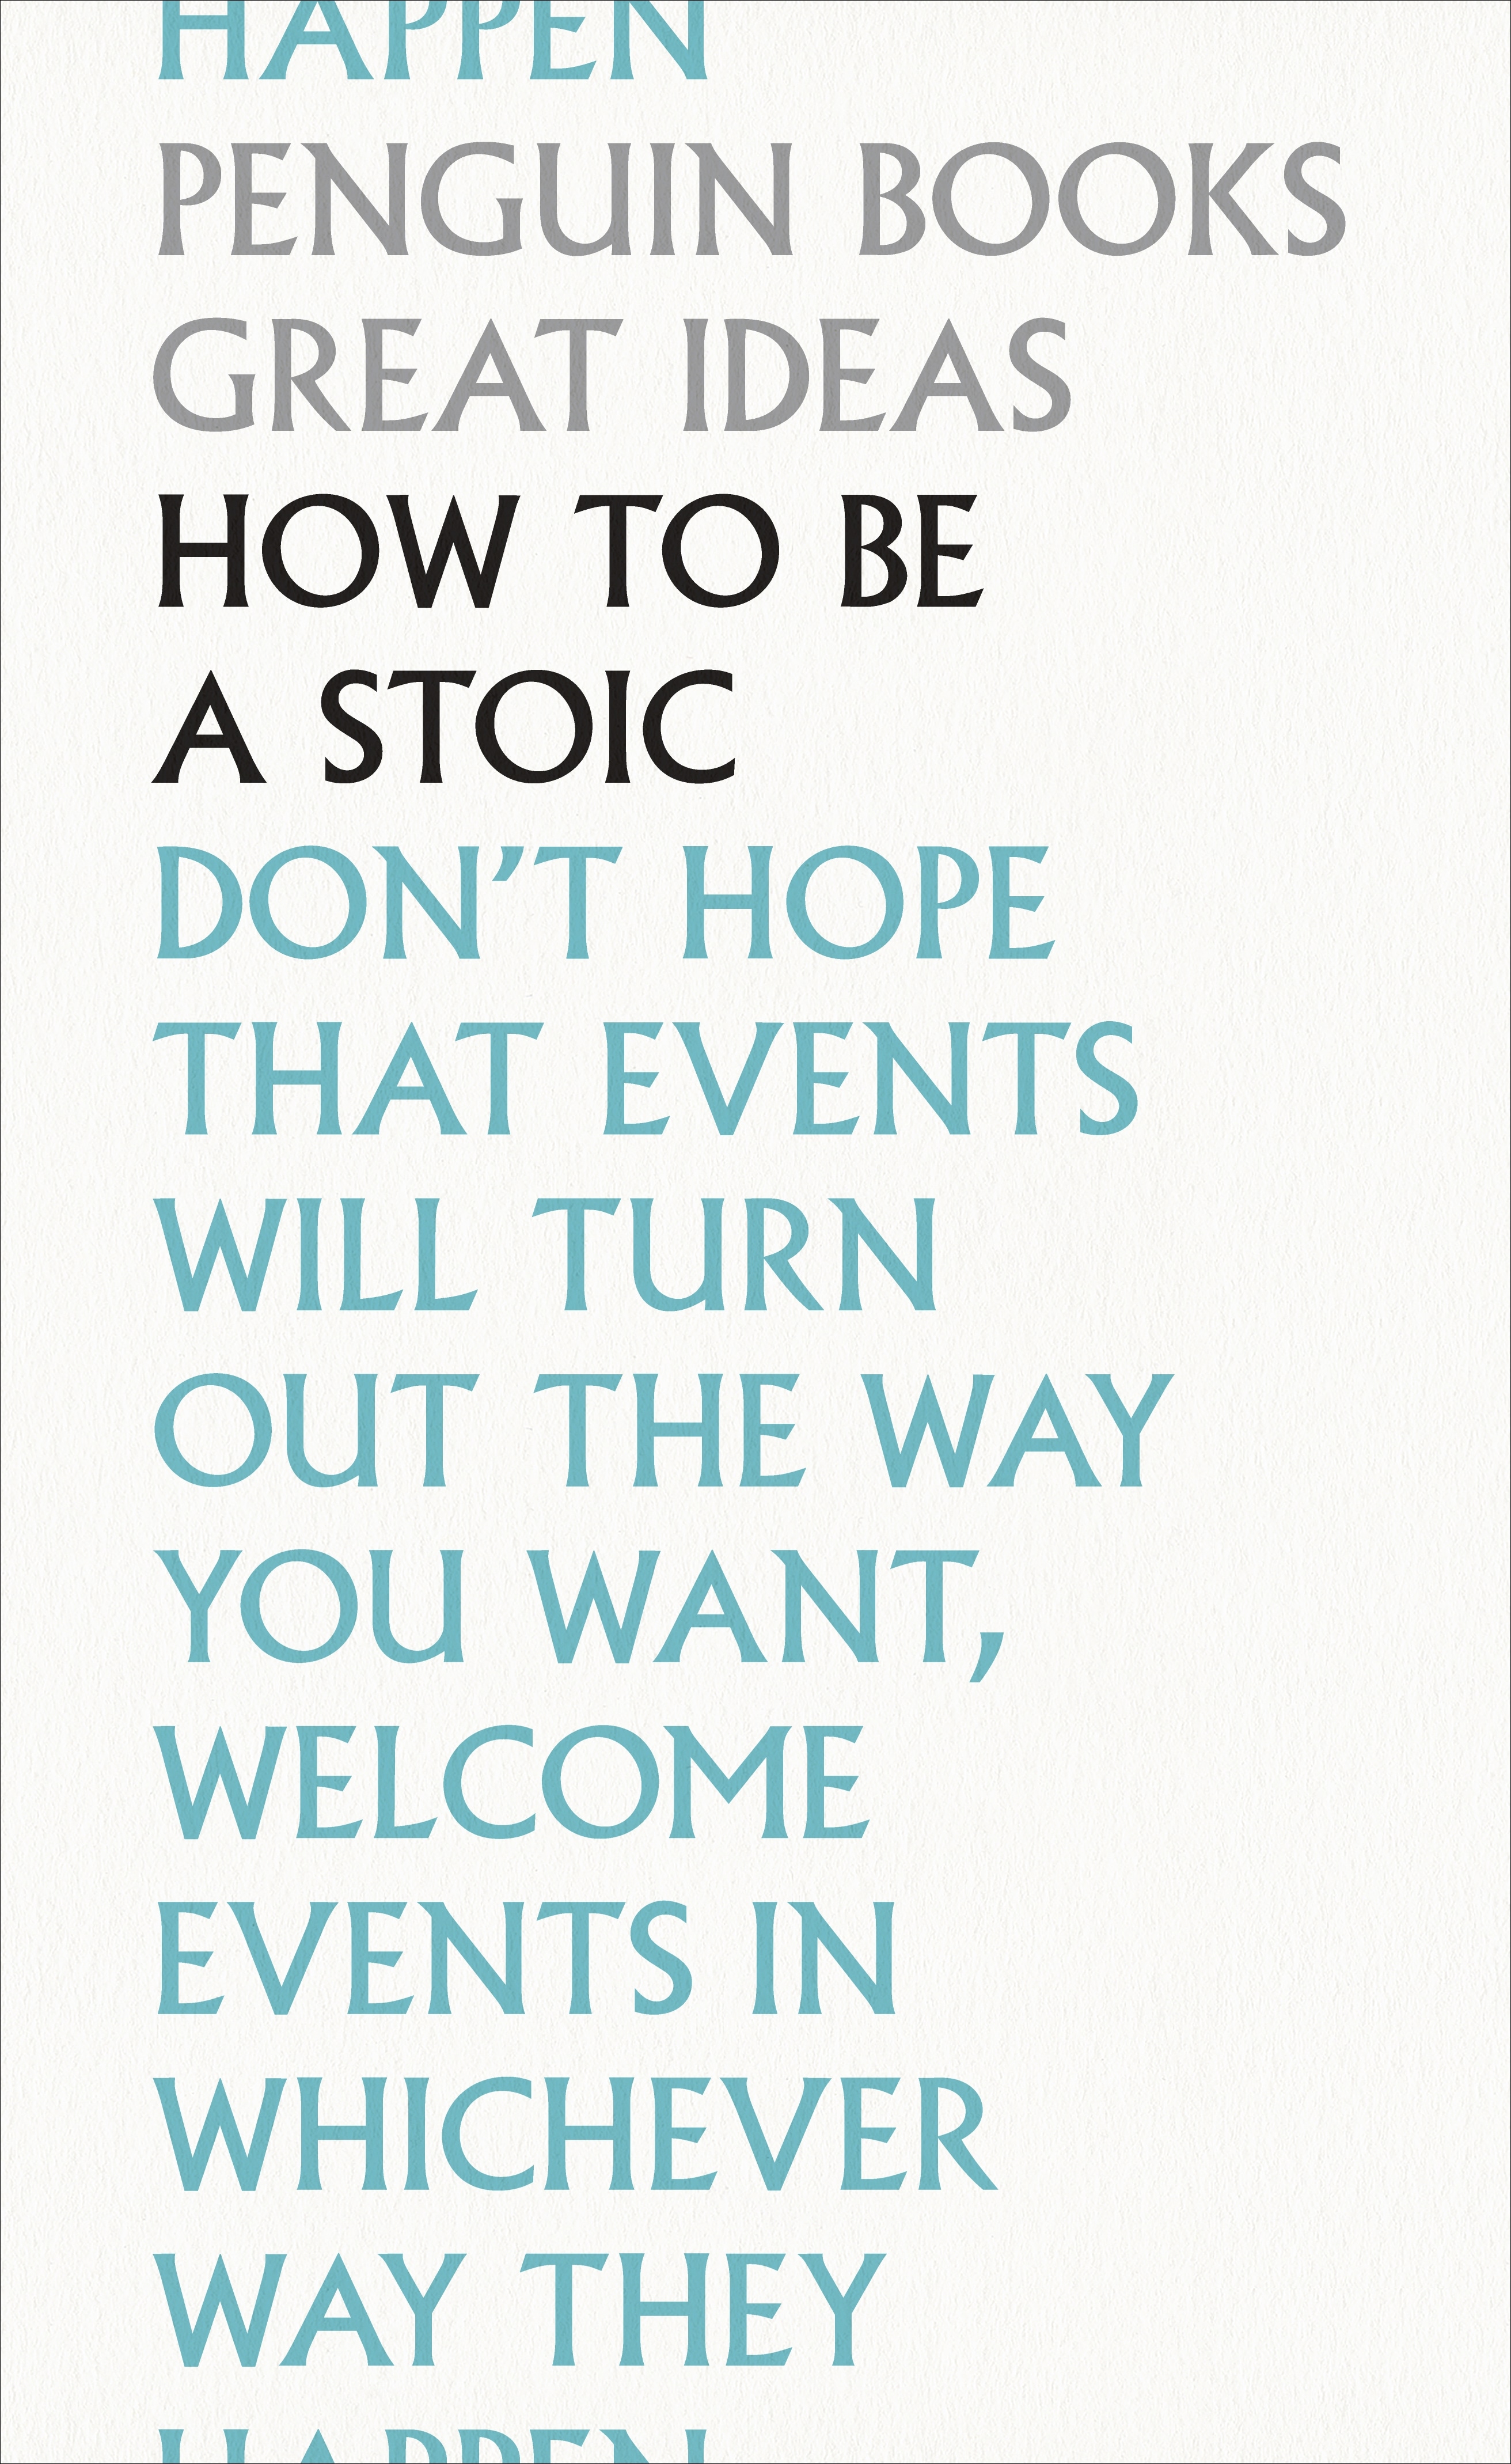 Book “How To Be a Stoic” by Epictetus — September 24, 2020